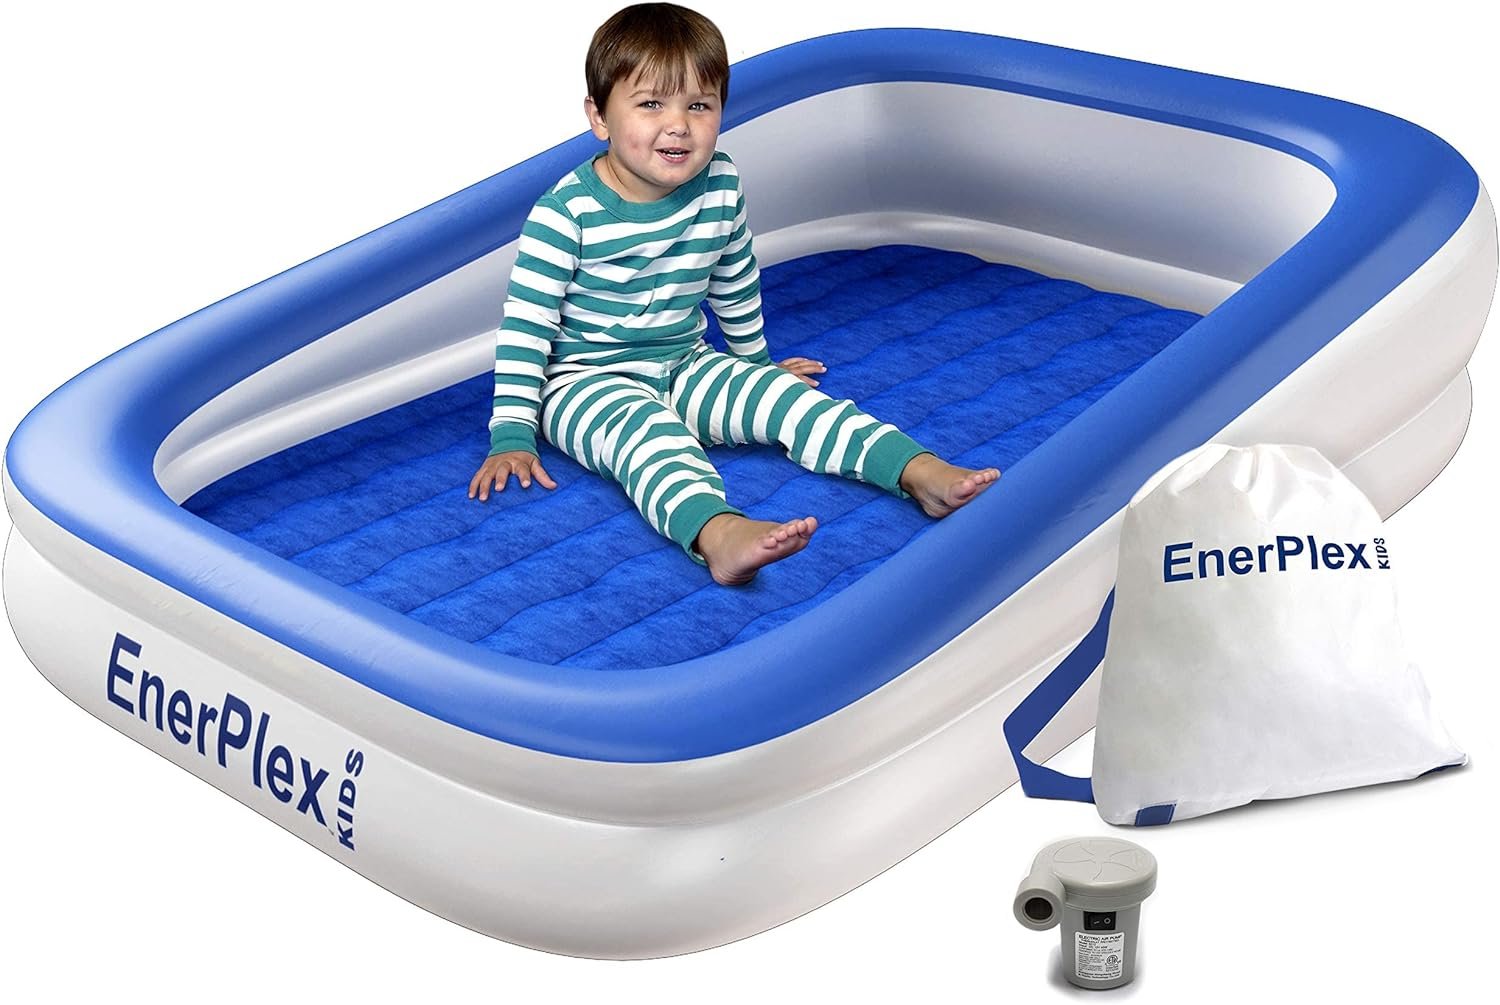 EnerPlex Inflatable Travel Bed Review